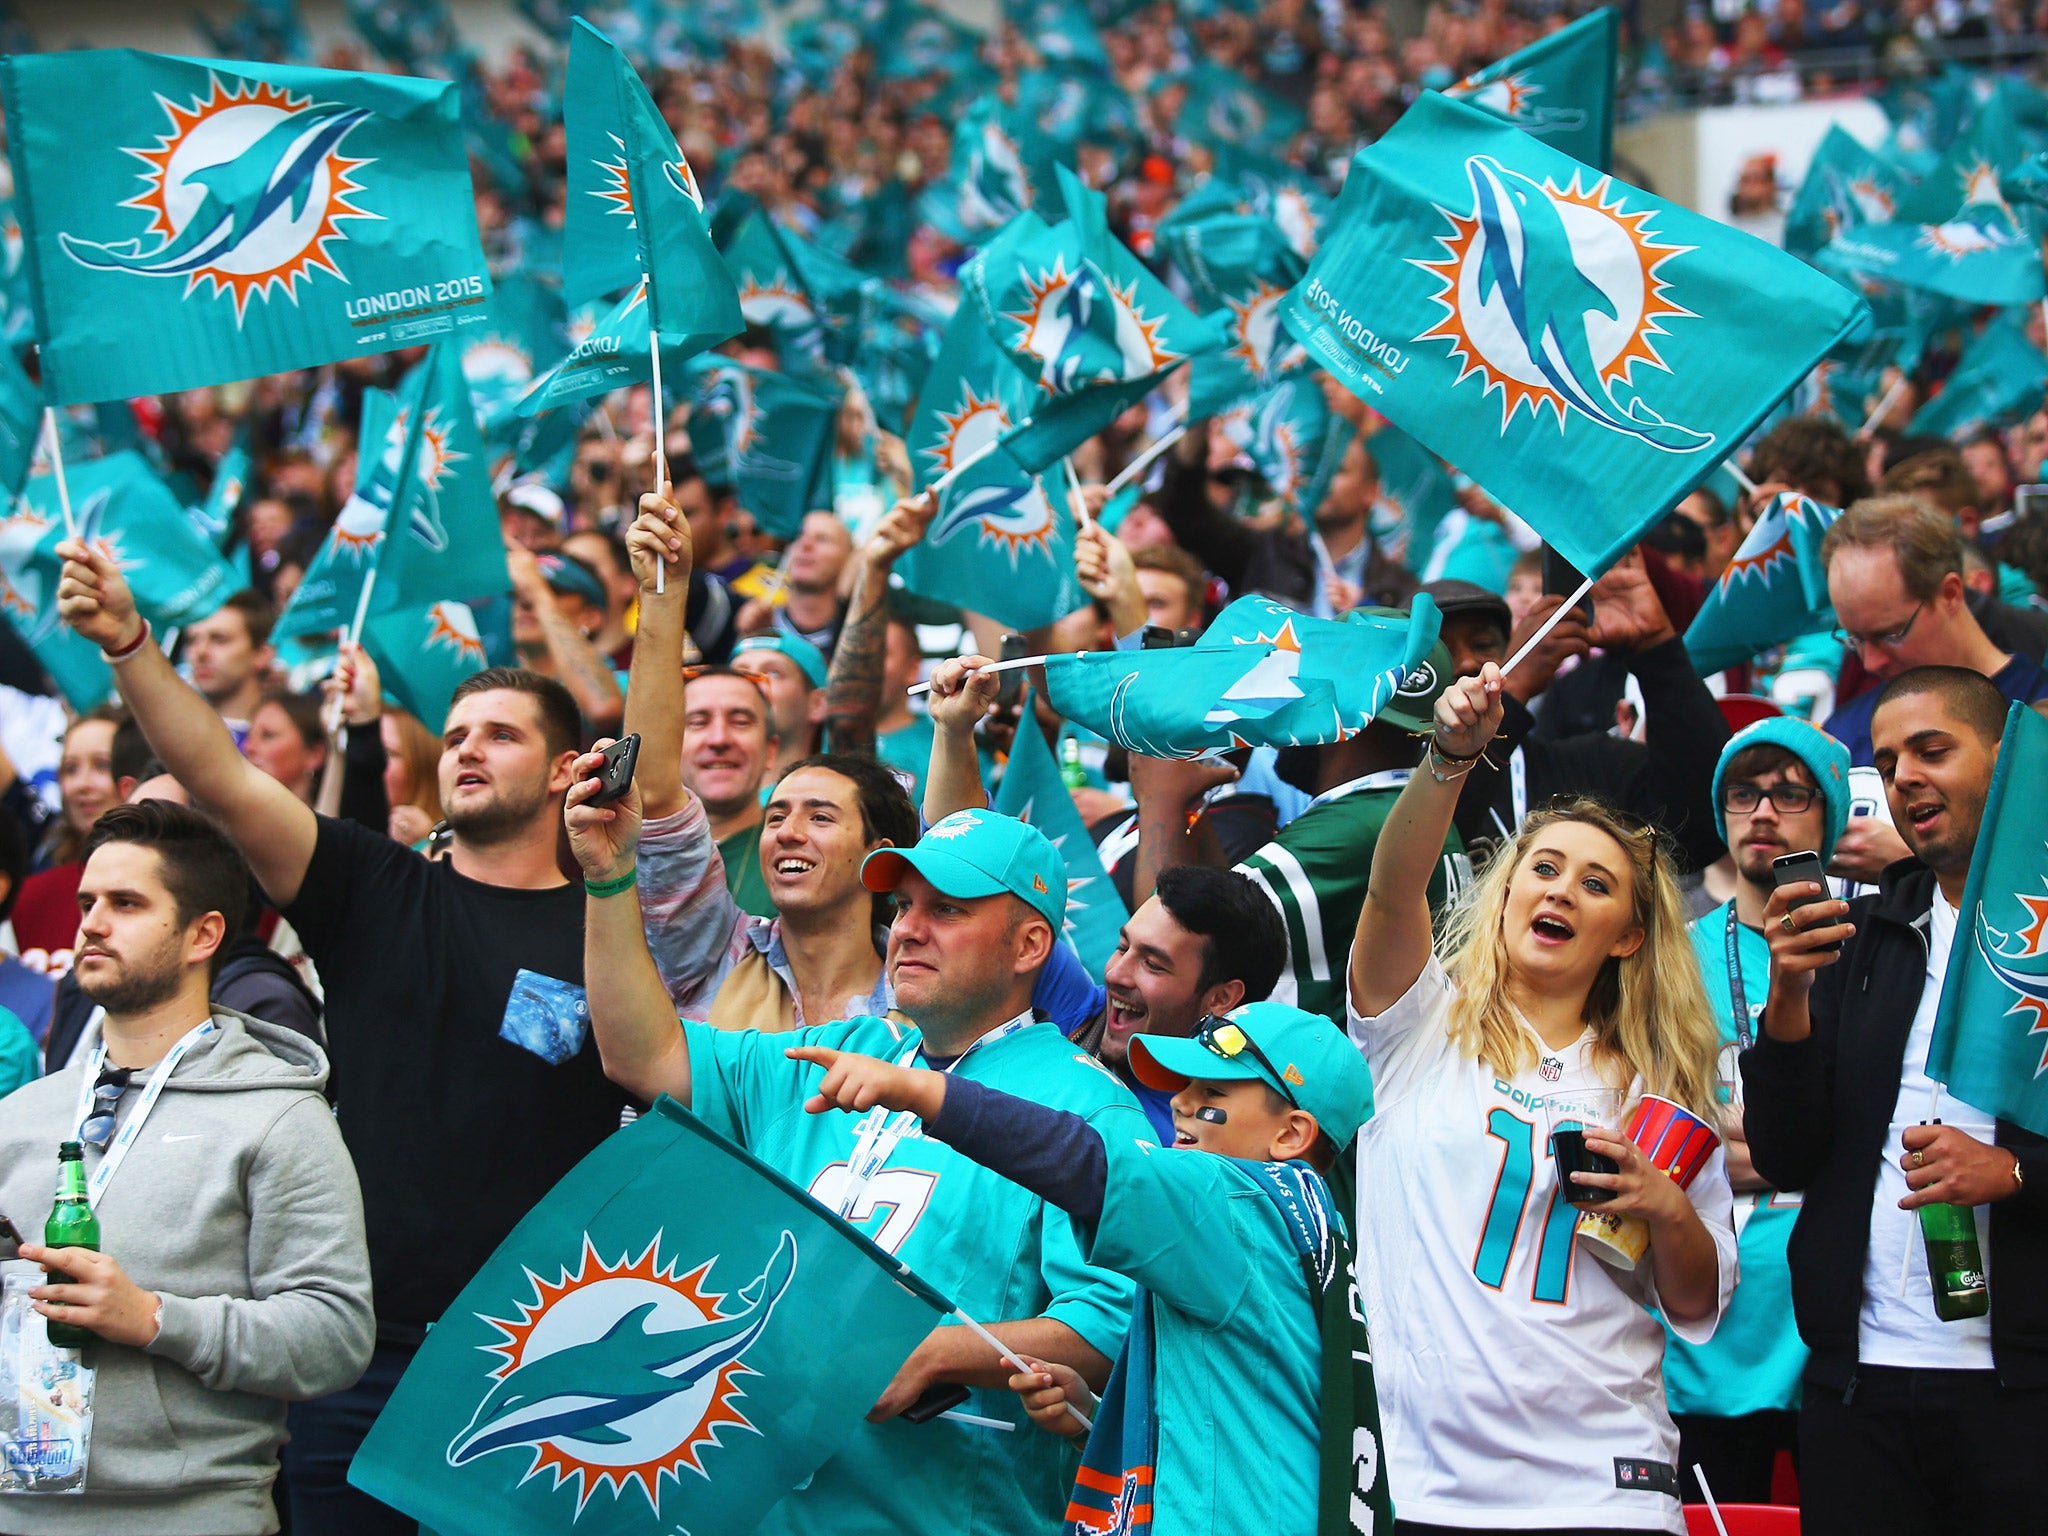 Enthusiastic Miami Dolphins fans show their support at Wembley on Sunday (Getty)